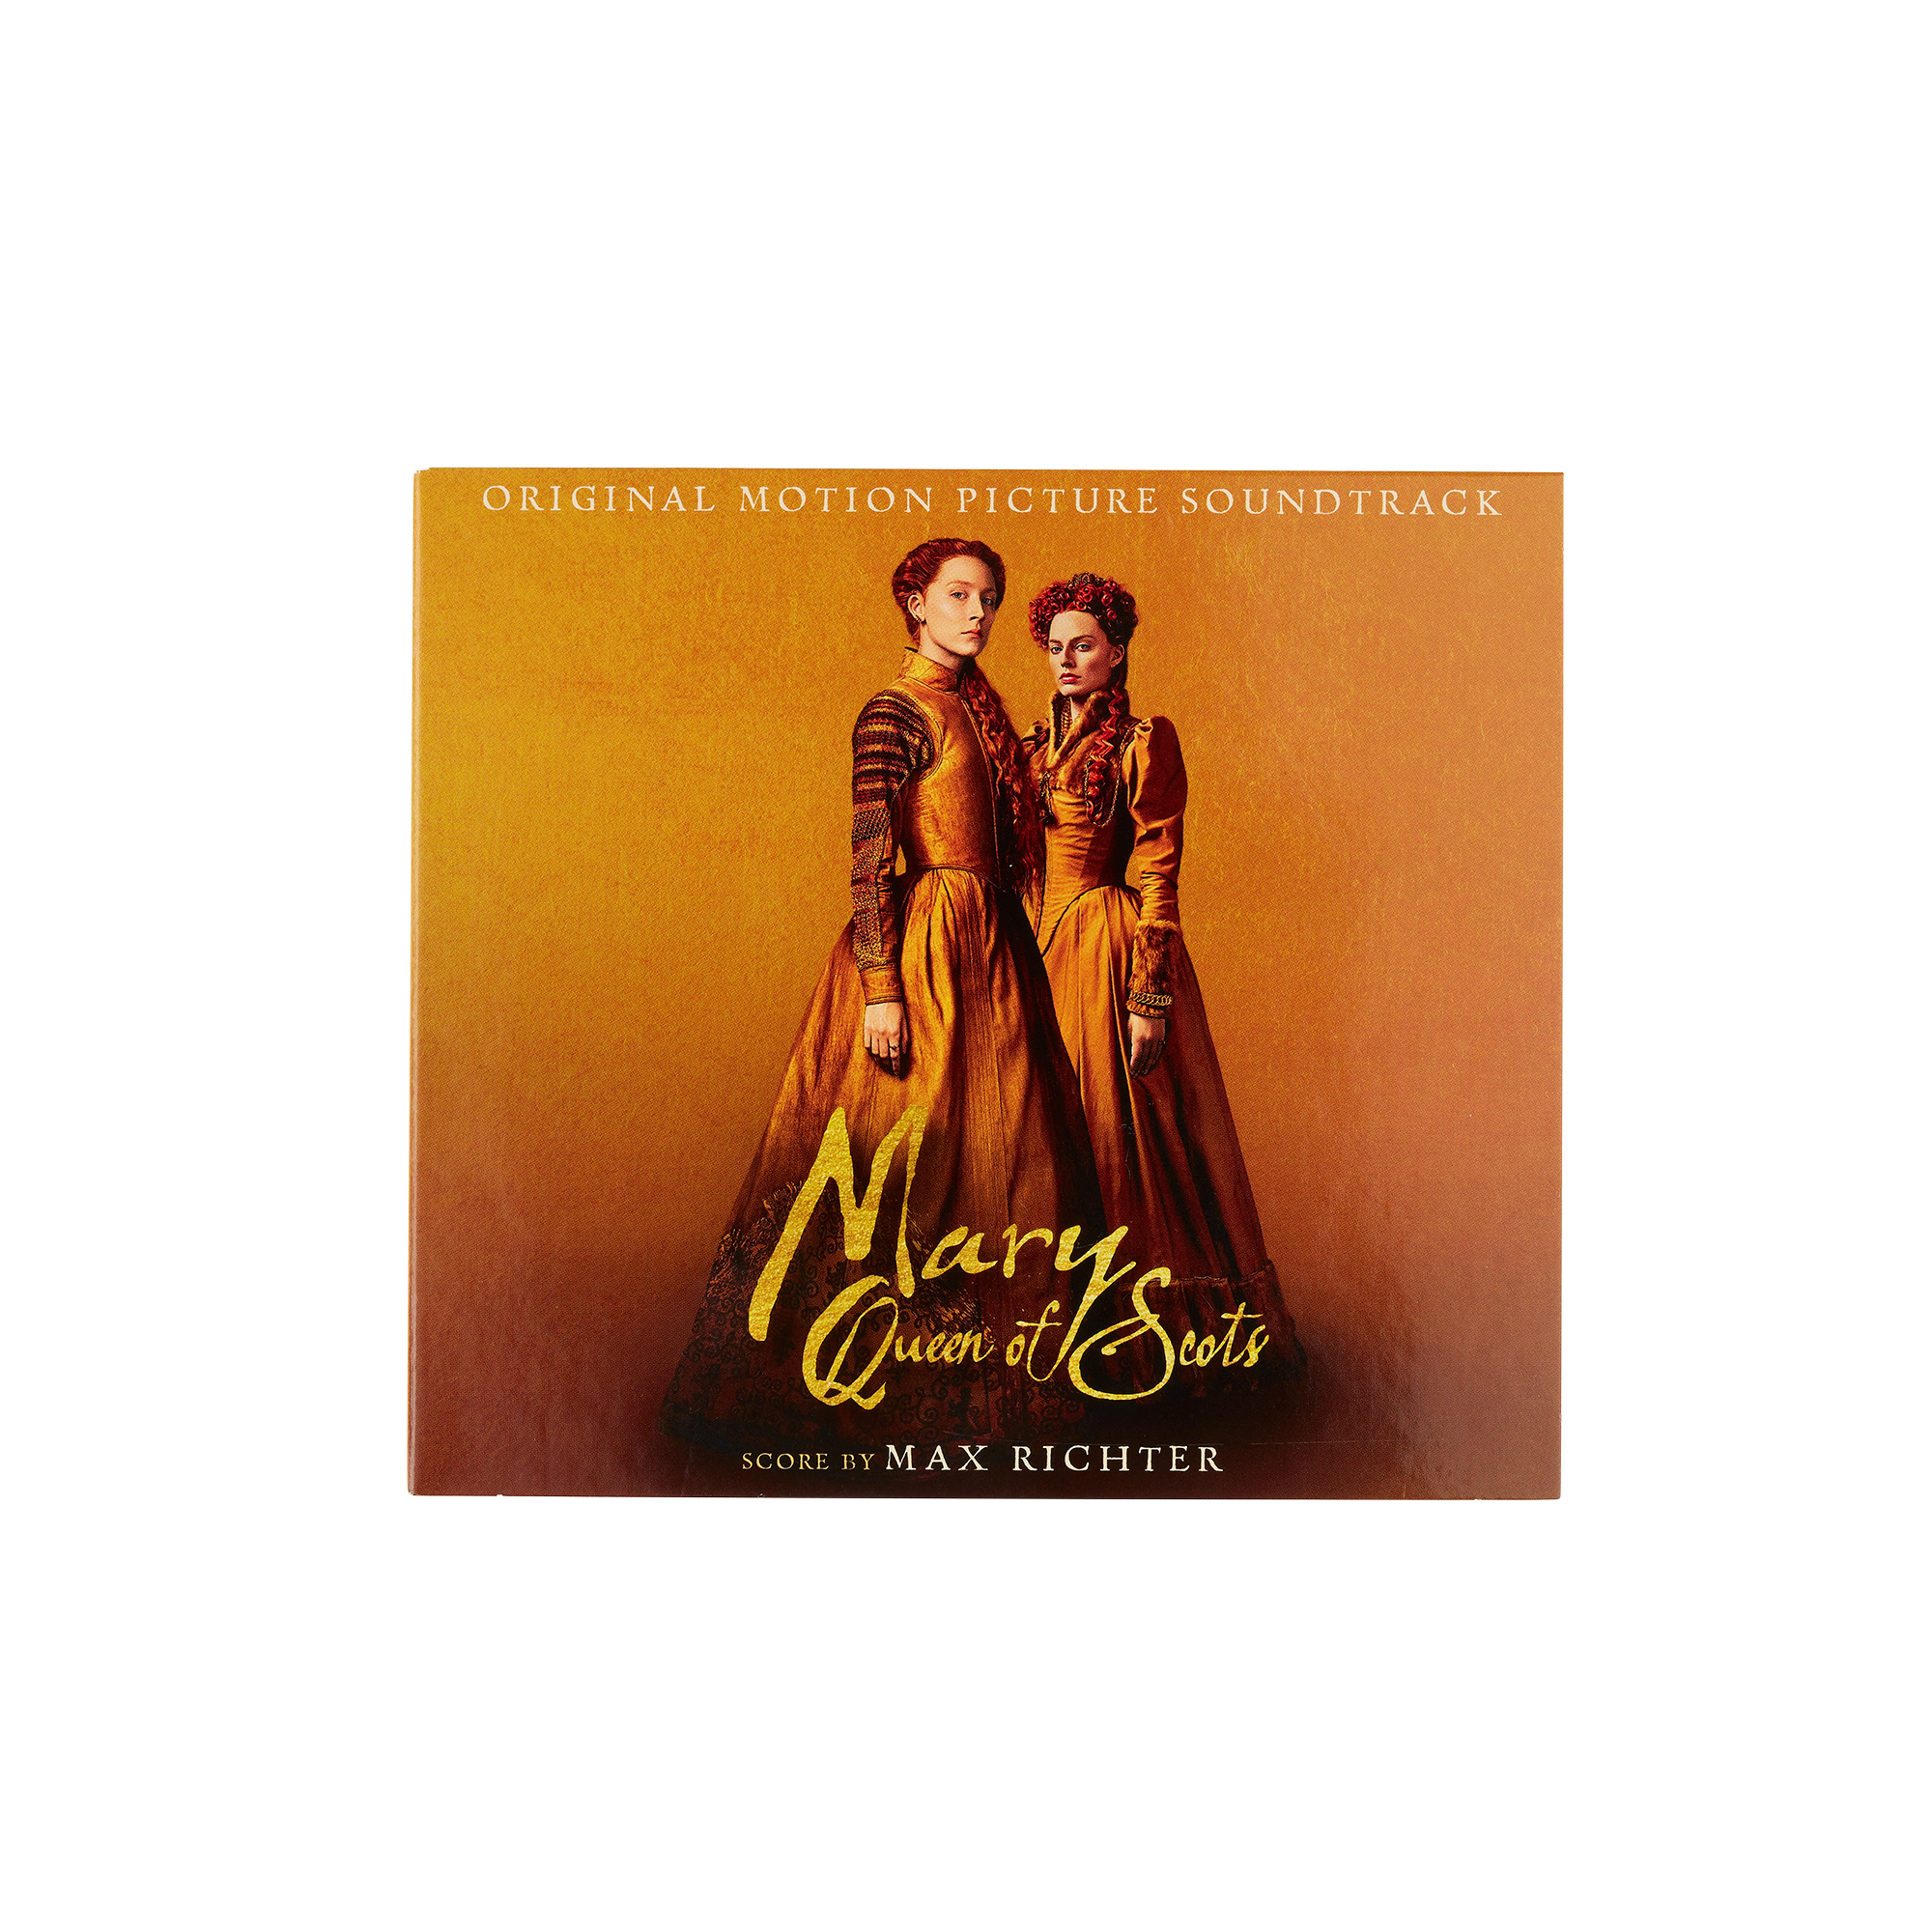 Max Richter - Mary Queen of Scots (Original Motion Picture Soundtrack): CD